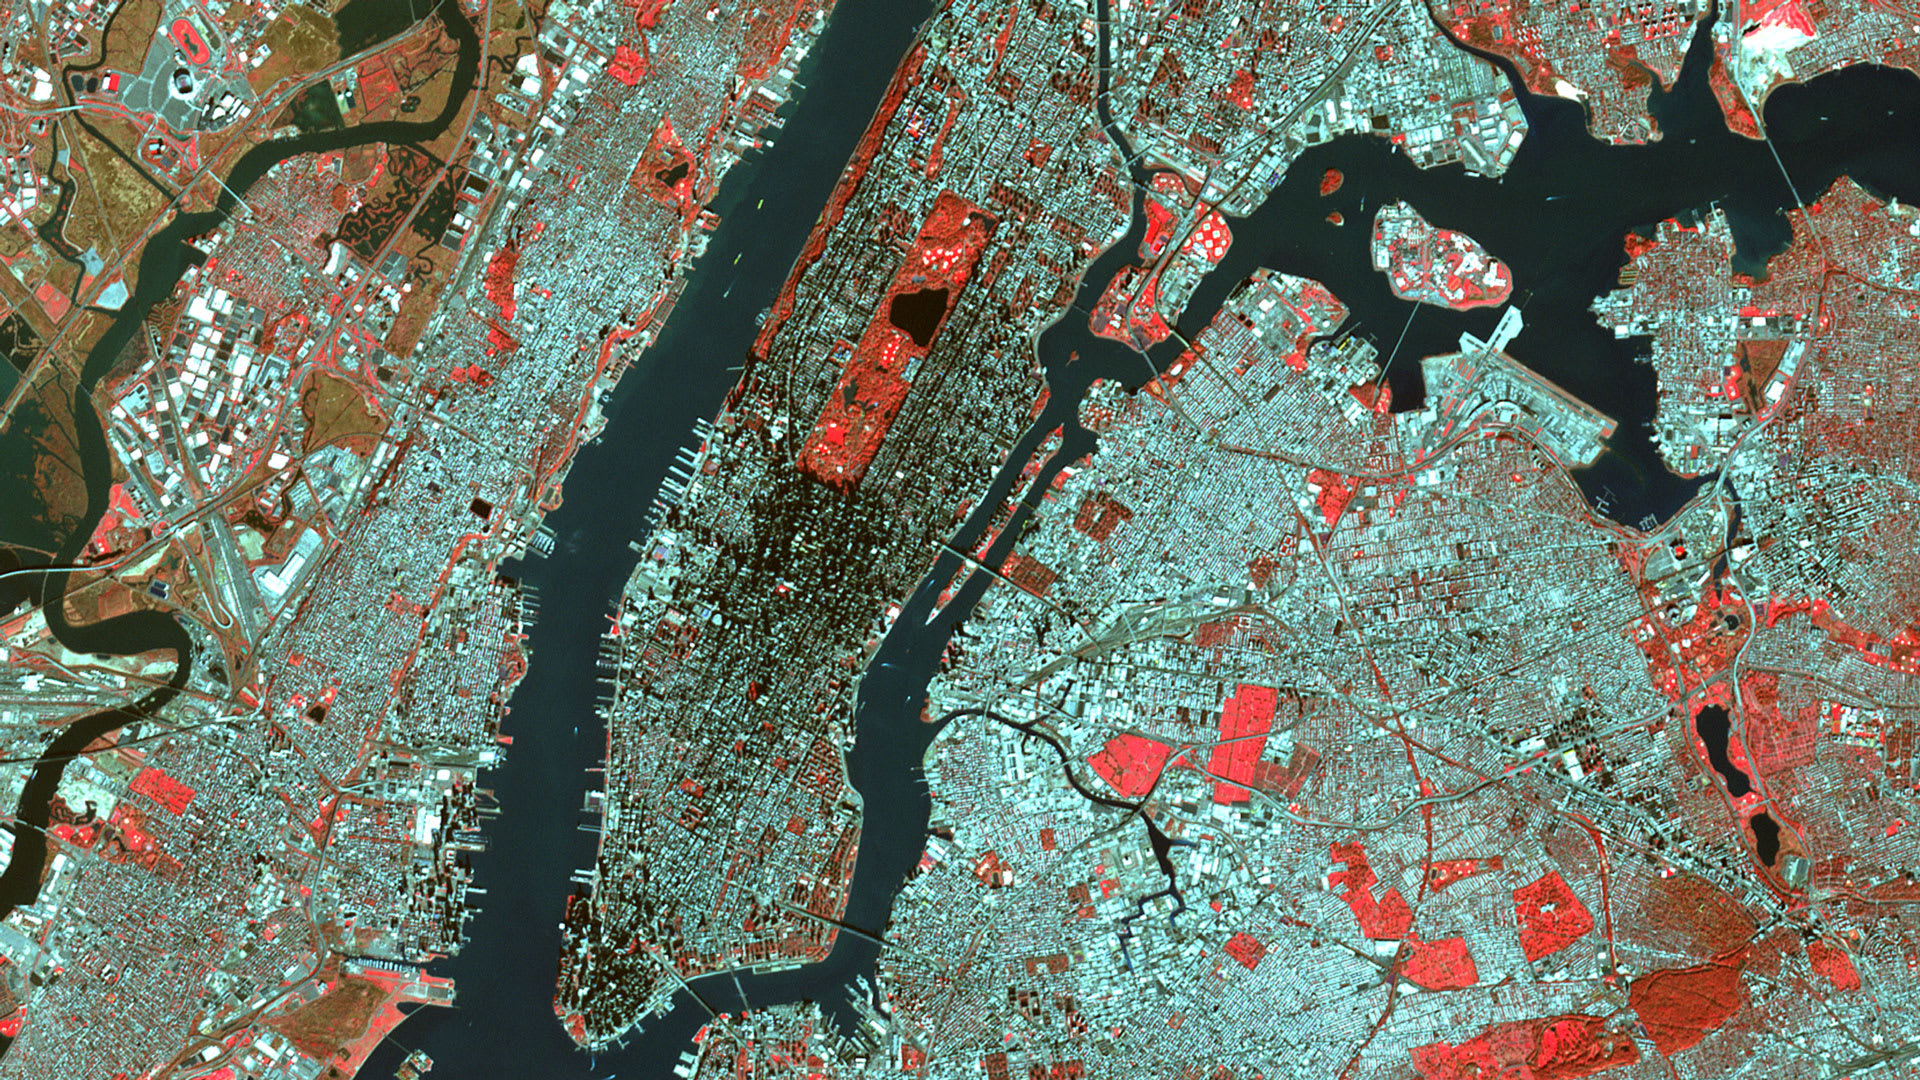 These stunning satellite images show how growing cities change the planet